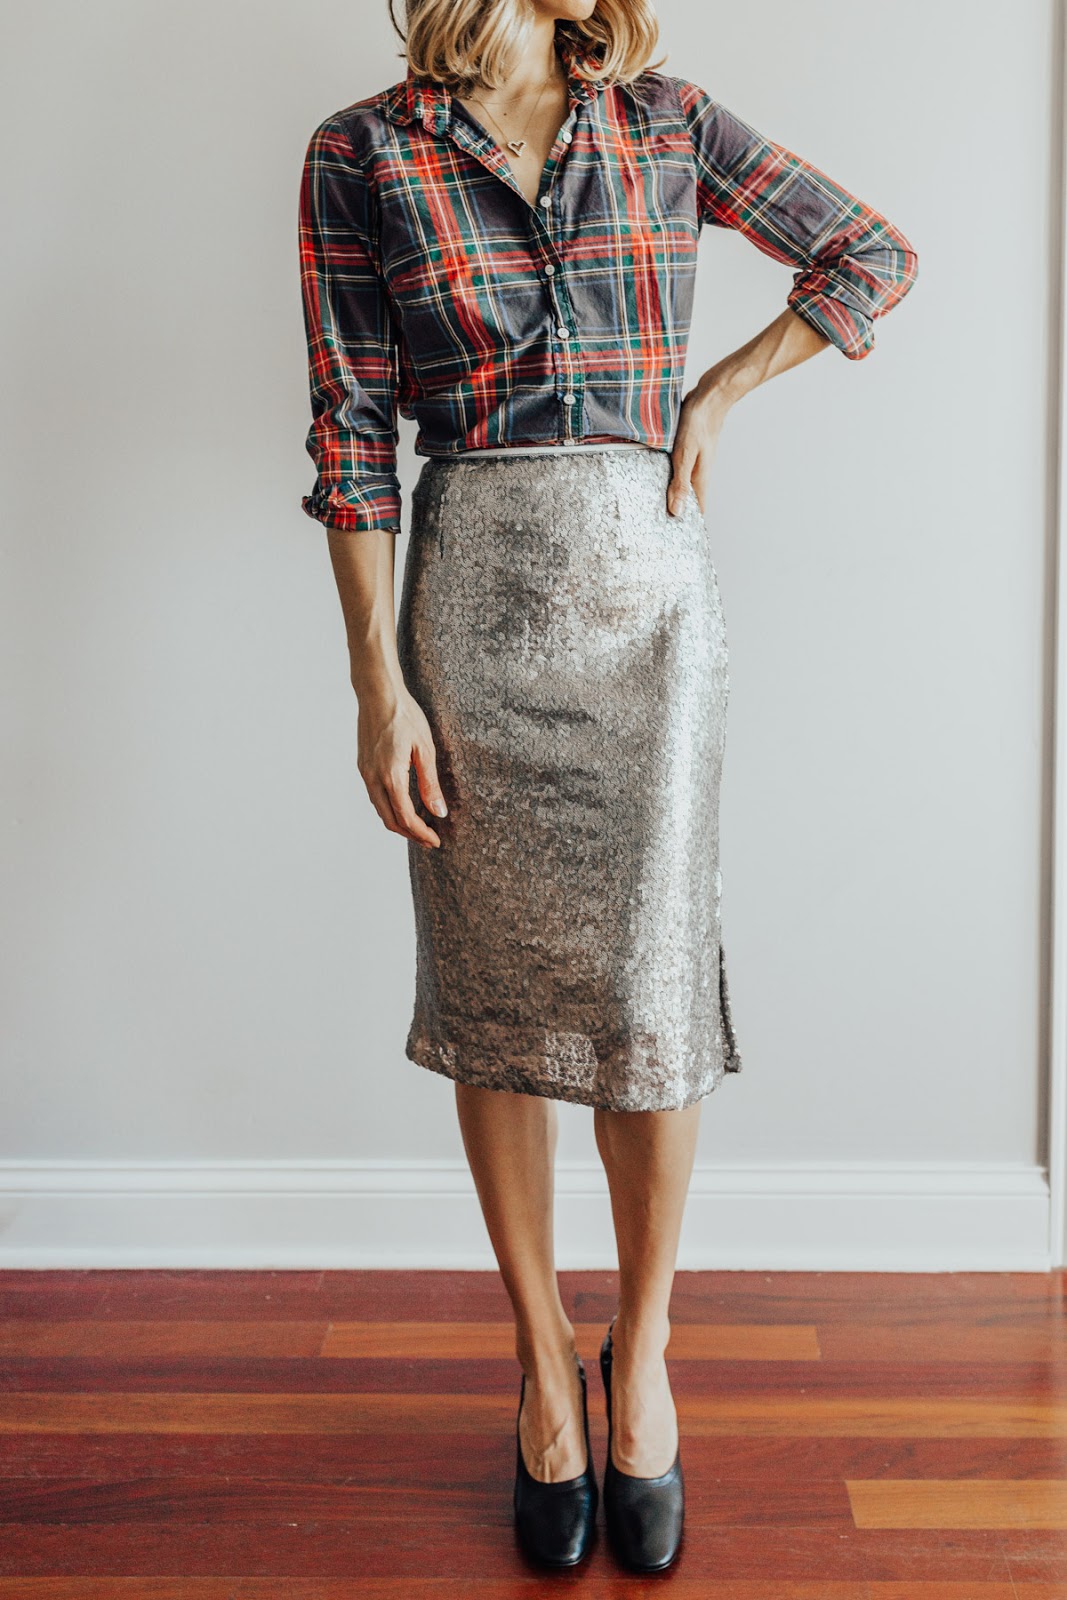 FASHION HOW TO WEAR A SEQUIN SKIRT ...